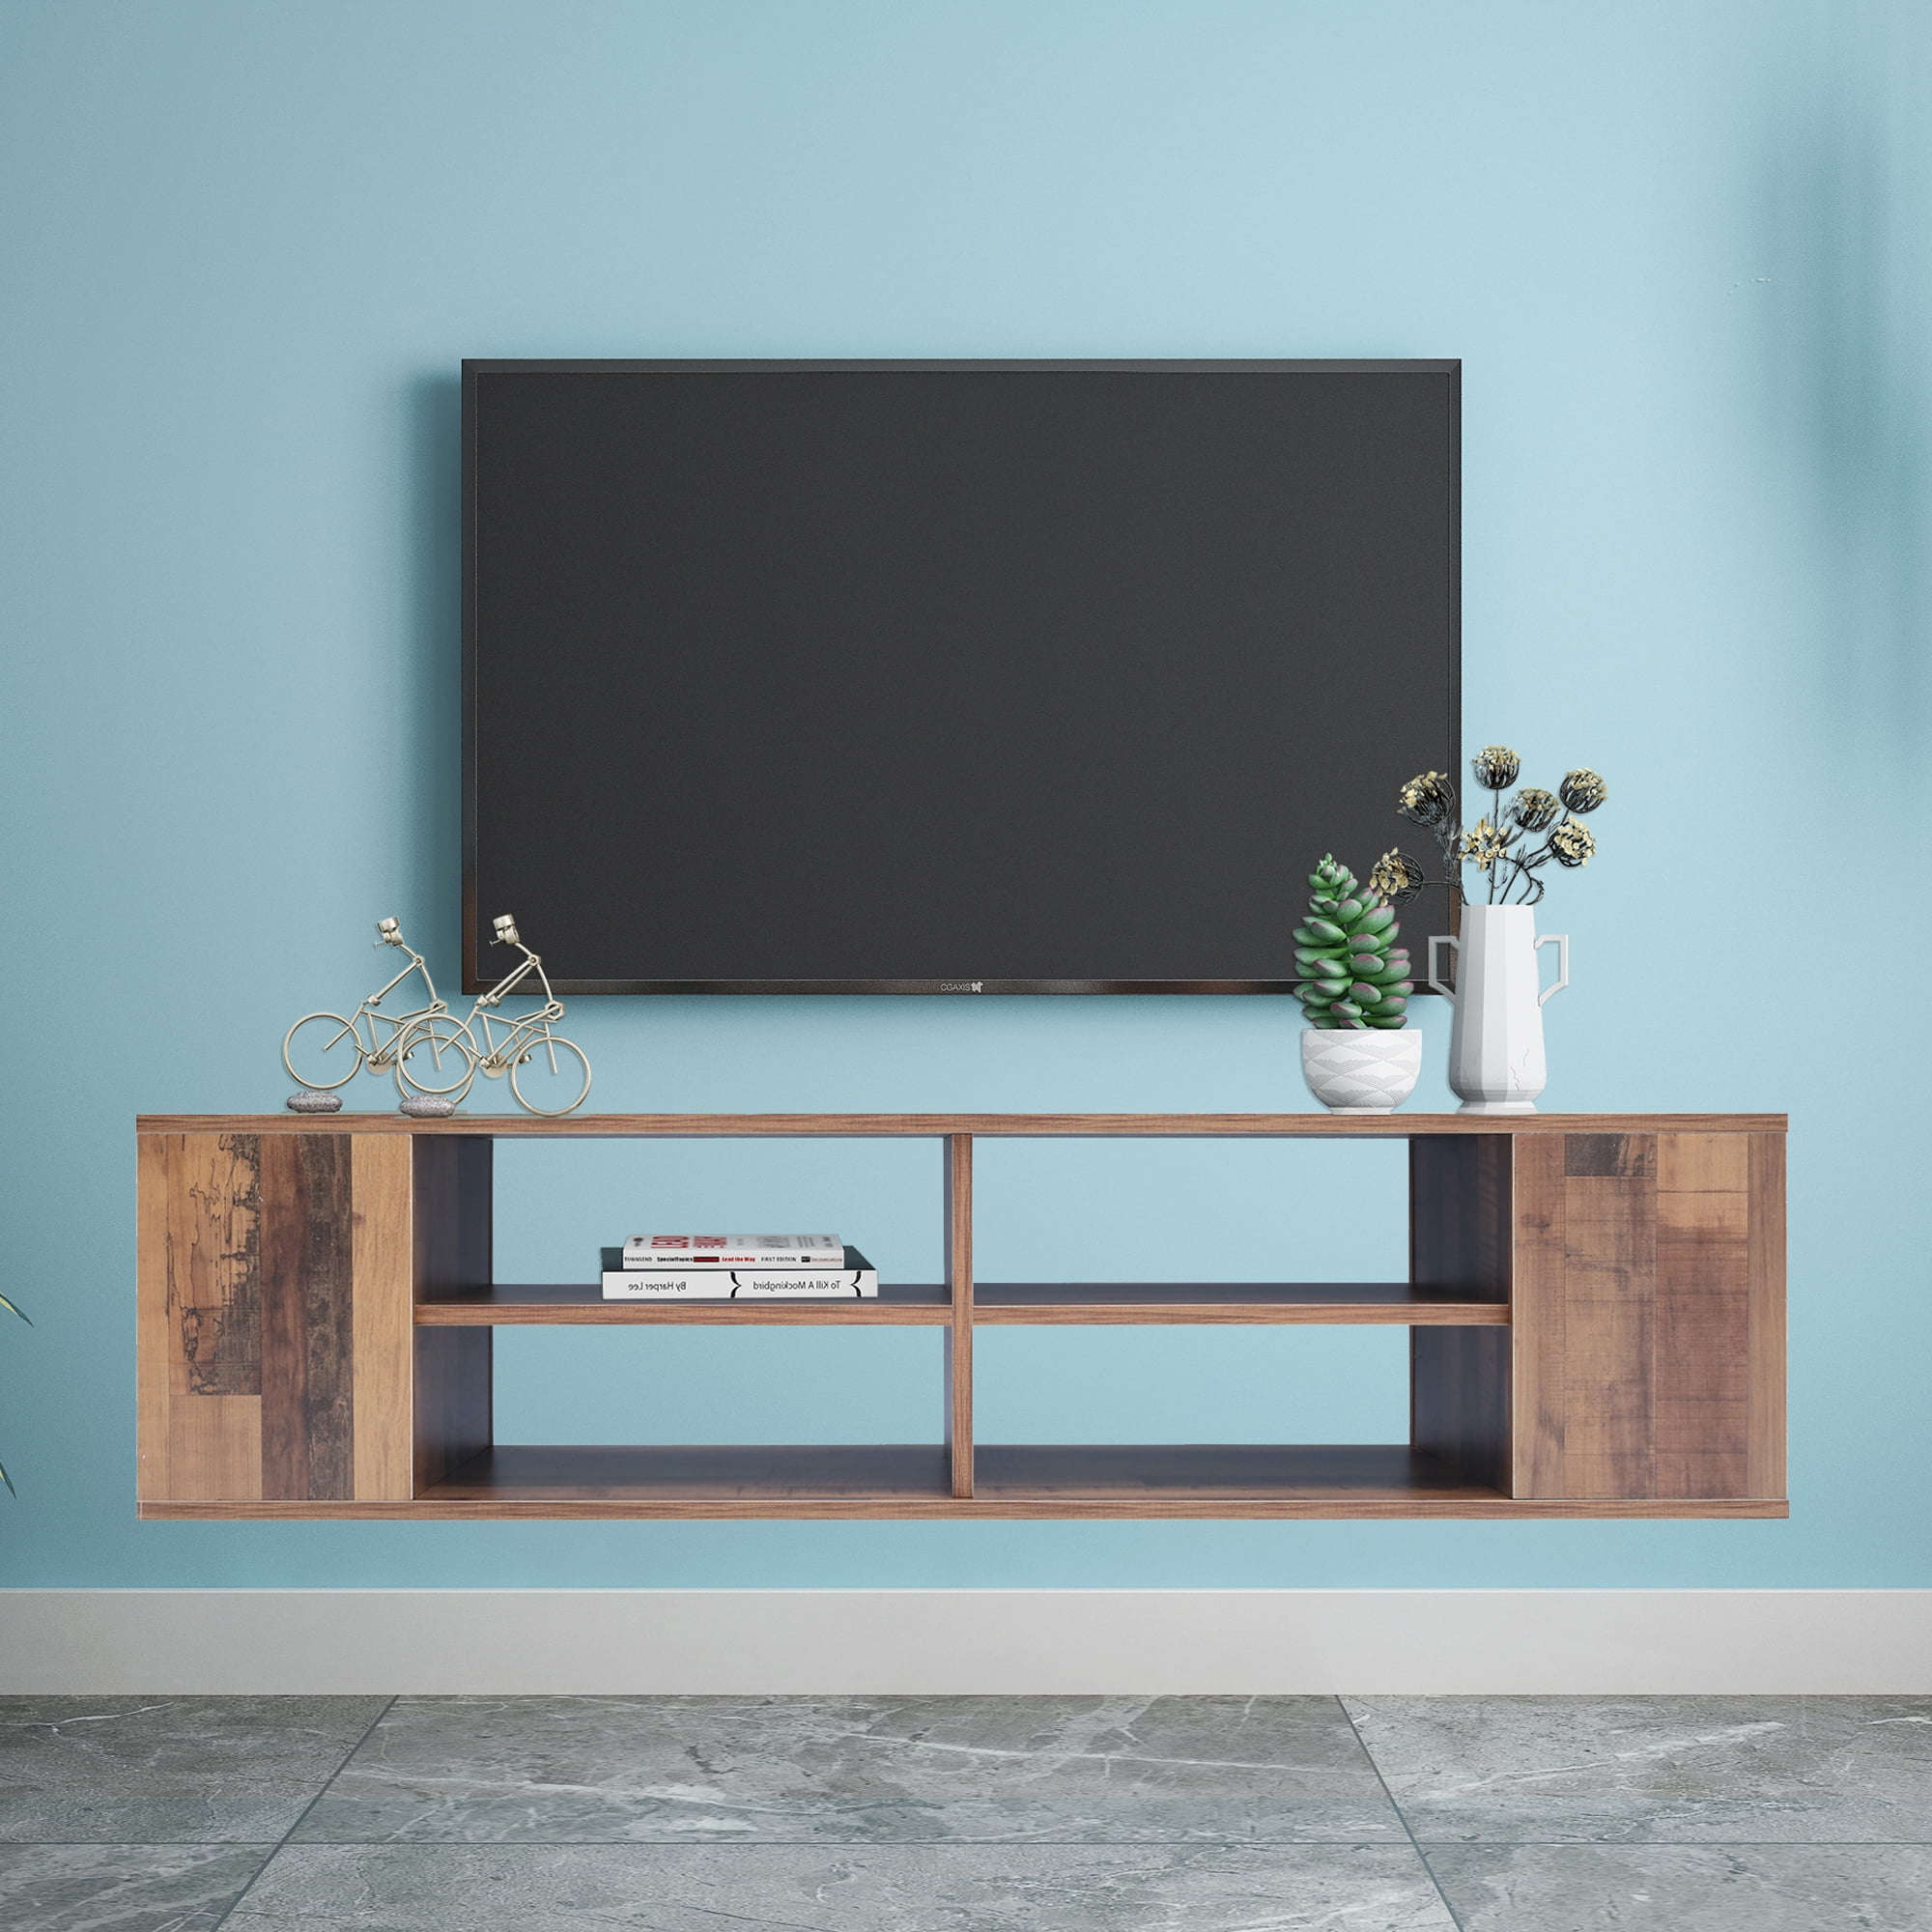 Details about   TV Stand Floating Wall Mounted Black Storage Cabinet Shelf Entertainment Center 